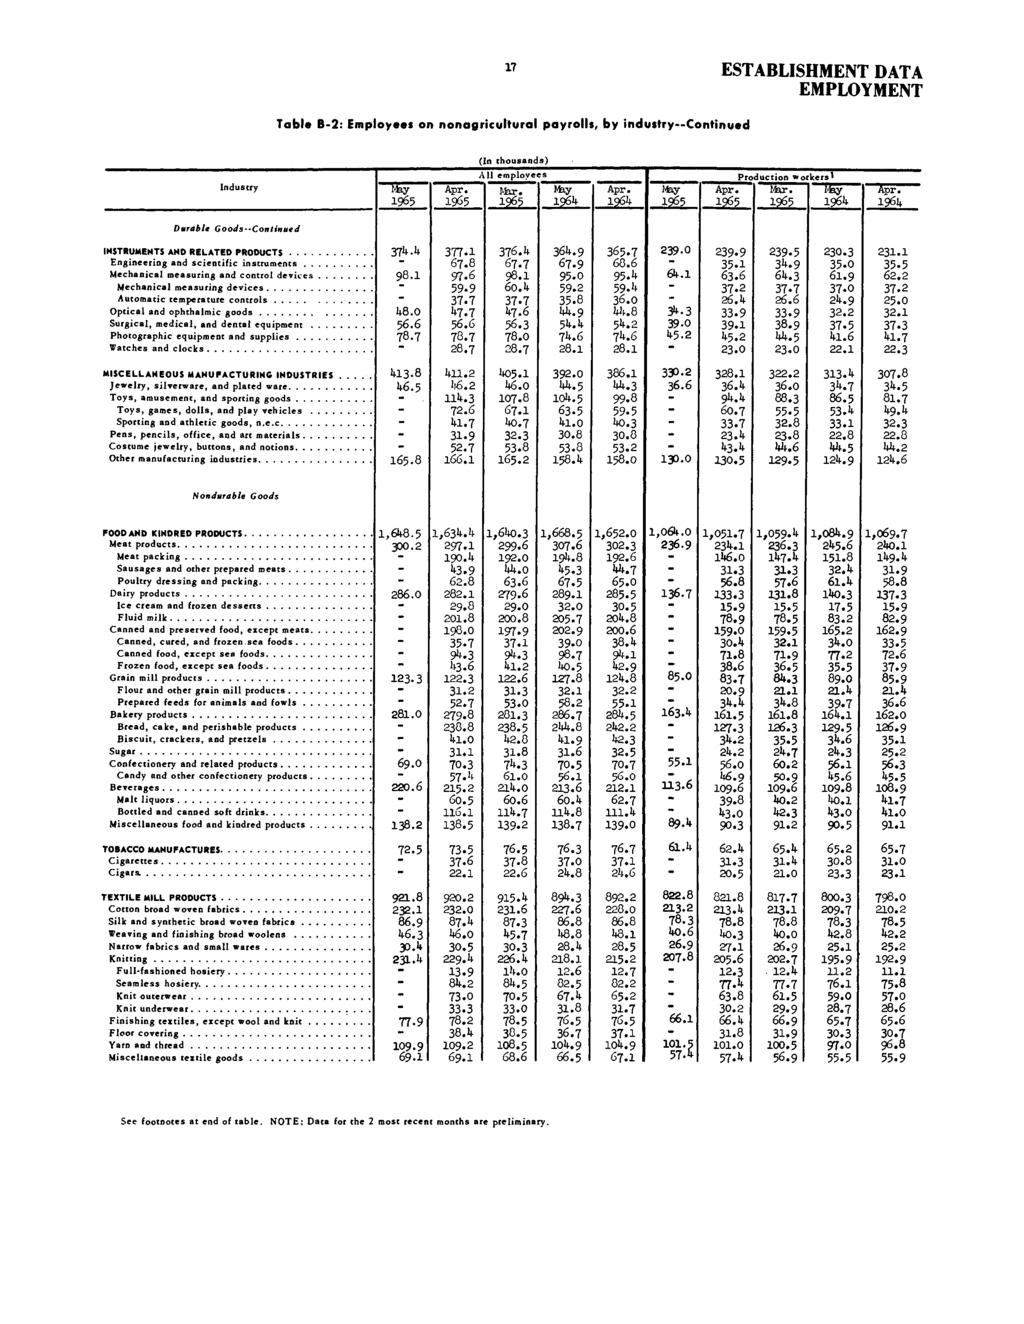 17 ESTABLISHMENT DATA EMPLOYMENT Table B-2: Employees on nonagricultural payrolls, by industry Continued (In thousands) Industry All employees Production workers 1 live. 19614-61 19614.